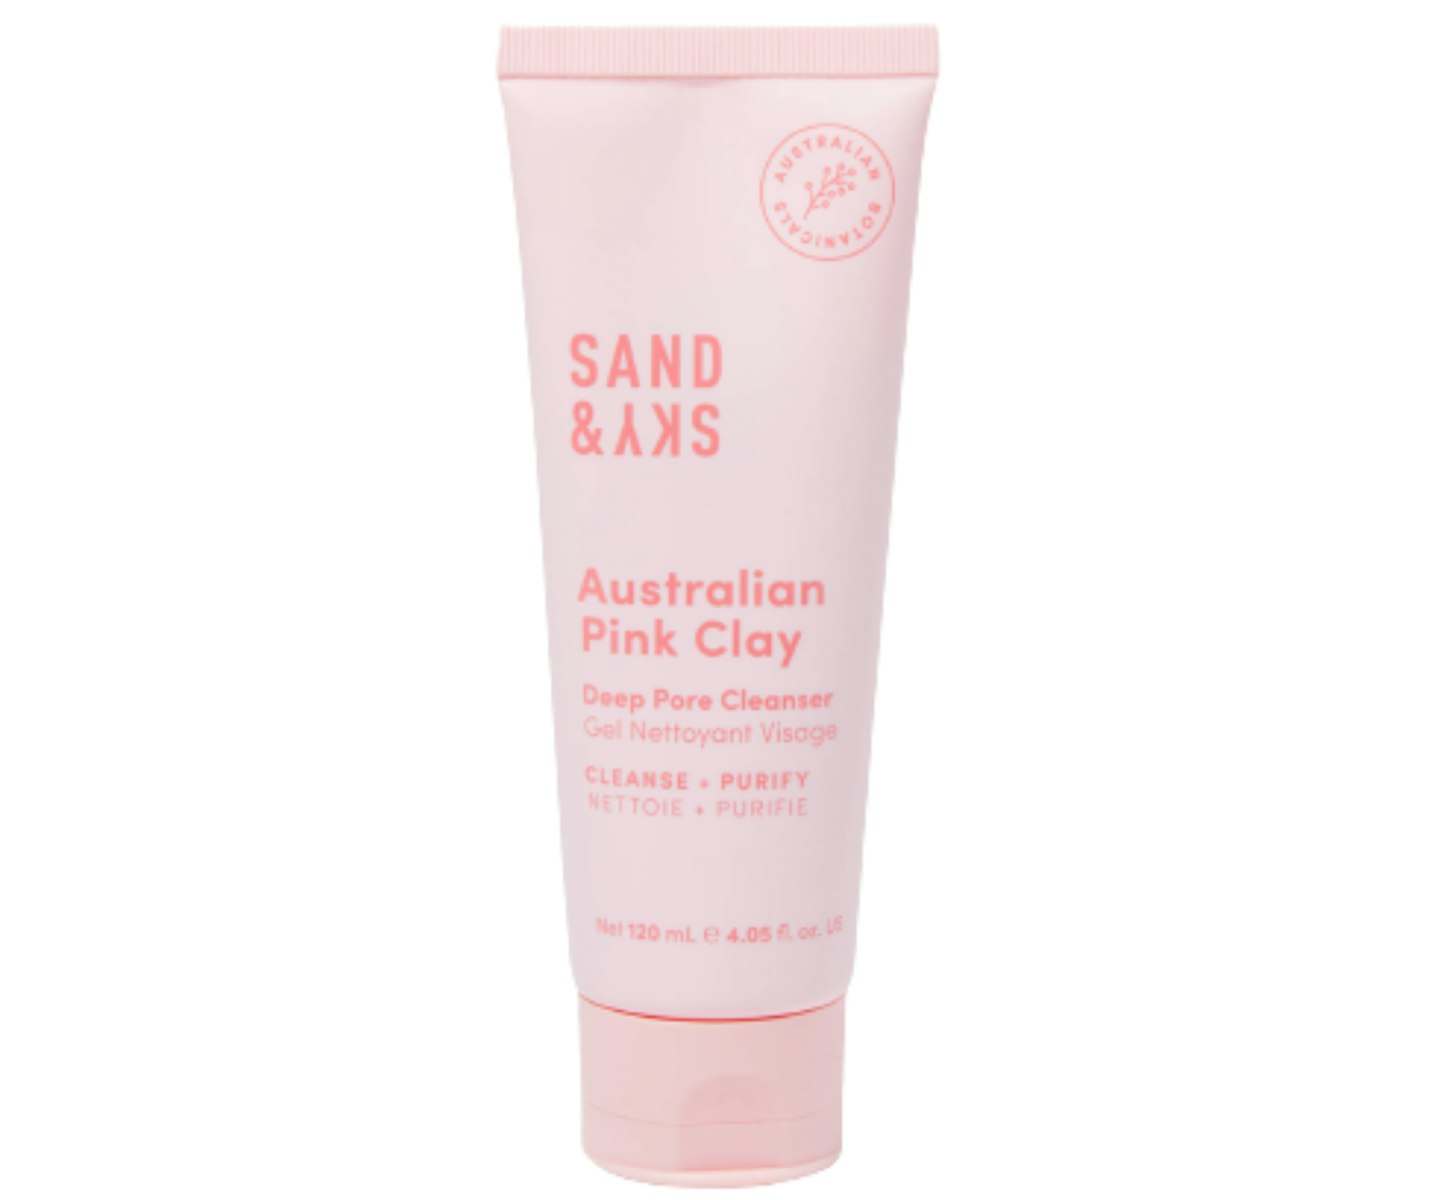 A picture of the Sand & Sky Australian Pink Clay Deep Pore Cleanser